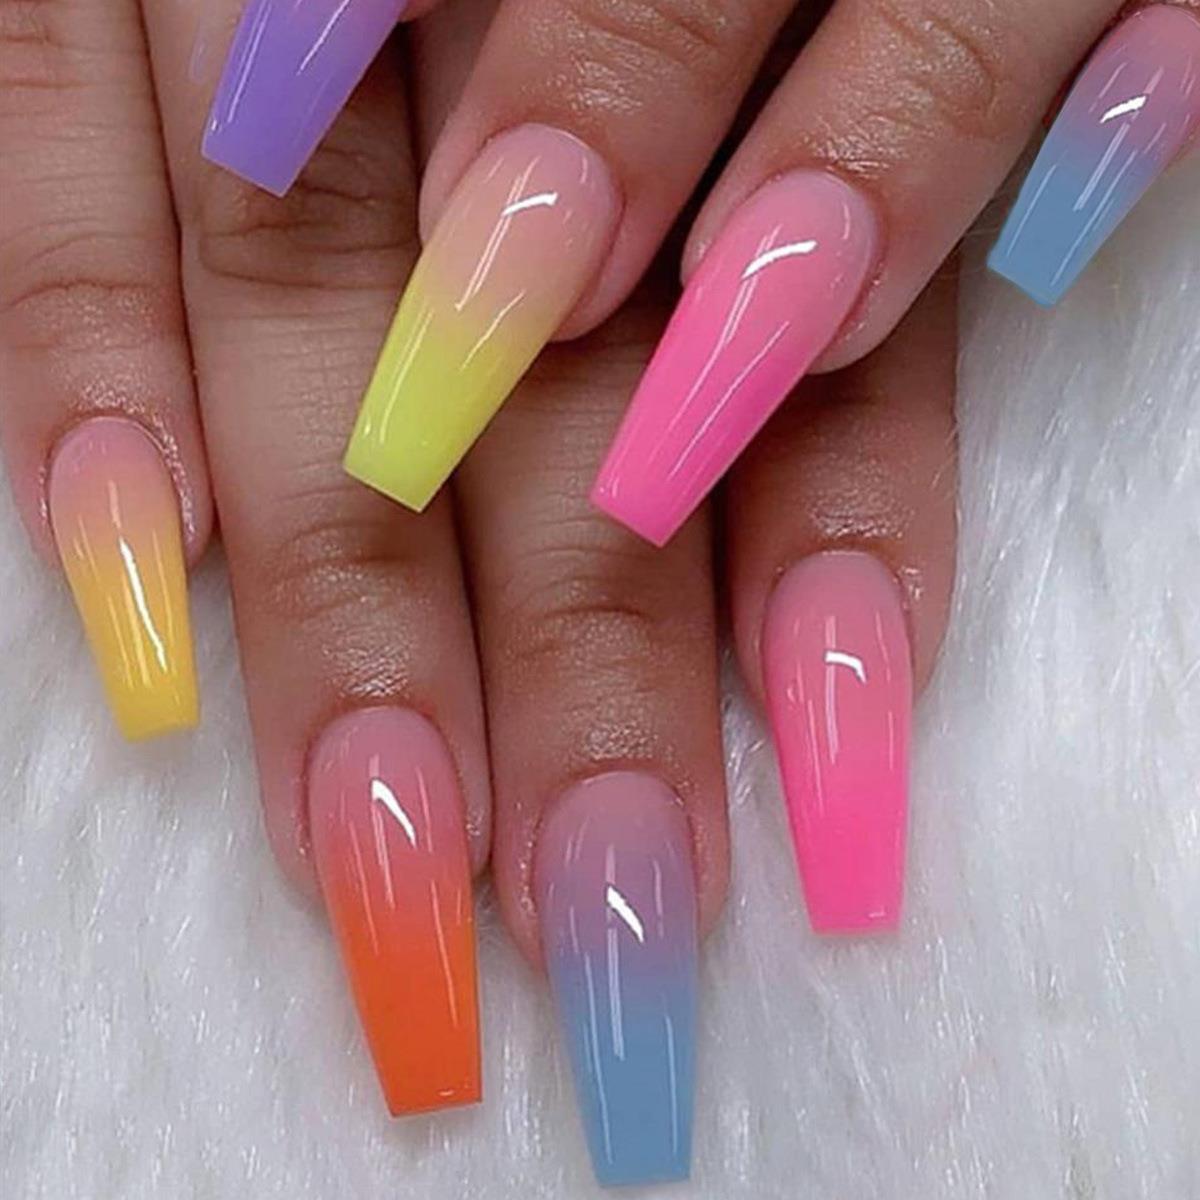 Beyprern - 24 pcs Rainbow Gradient Coffin Long Press On Nails - Glossy Acrylic Ballerina False Nails for Women and Girls